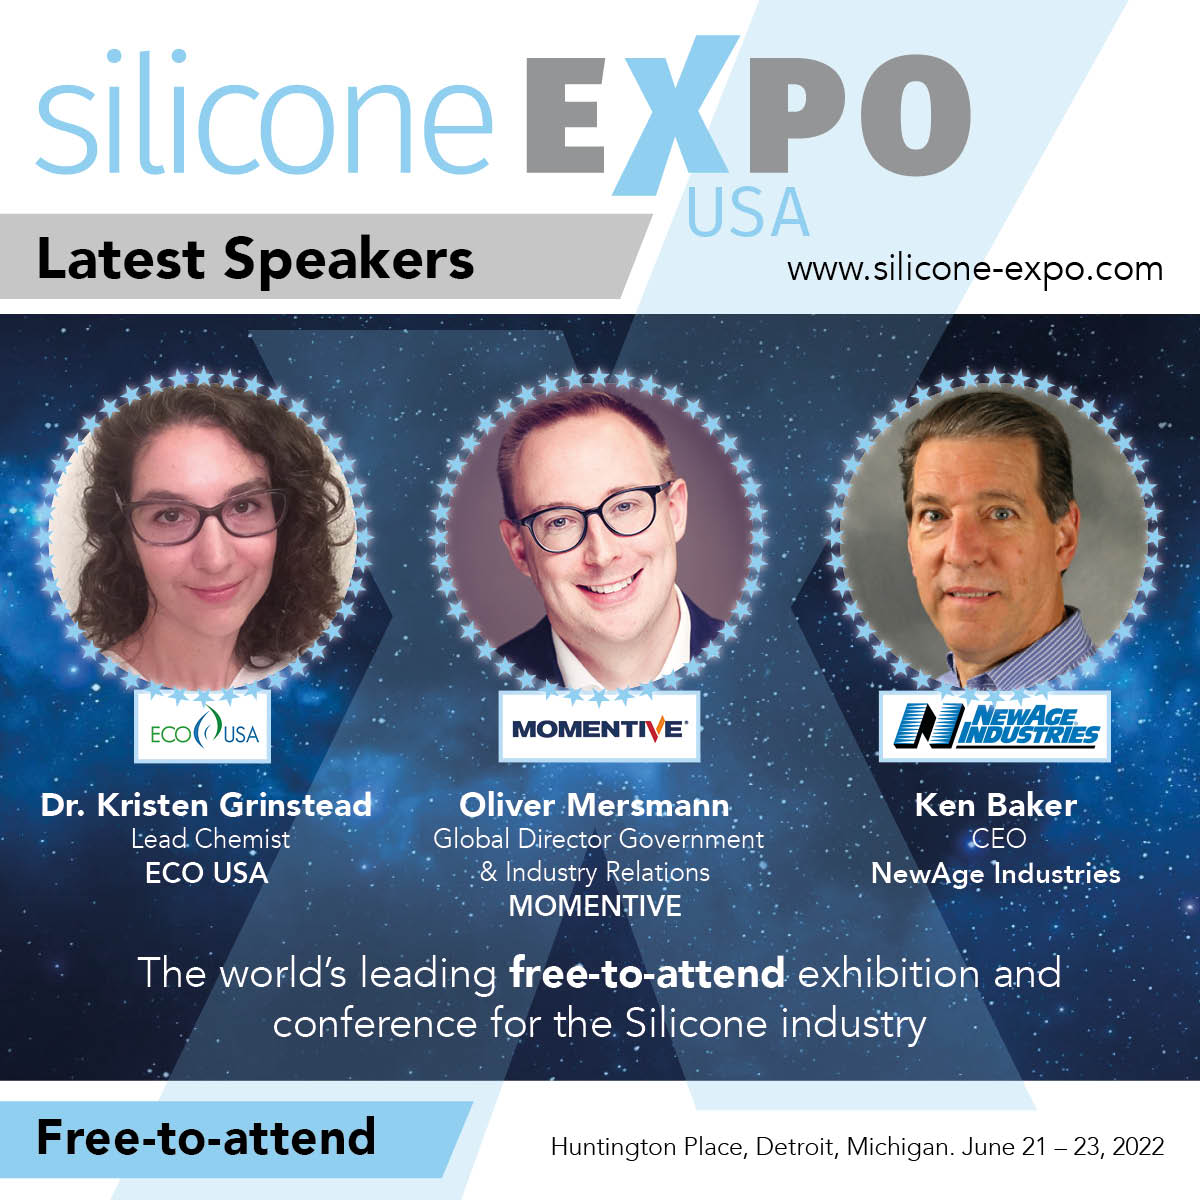 Silicone Expo USA - LinkedIn post for Speakers 28-2-1-jpg